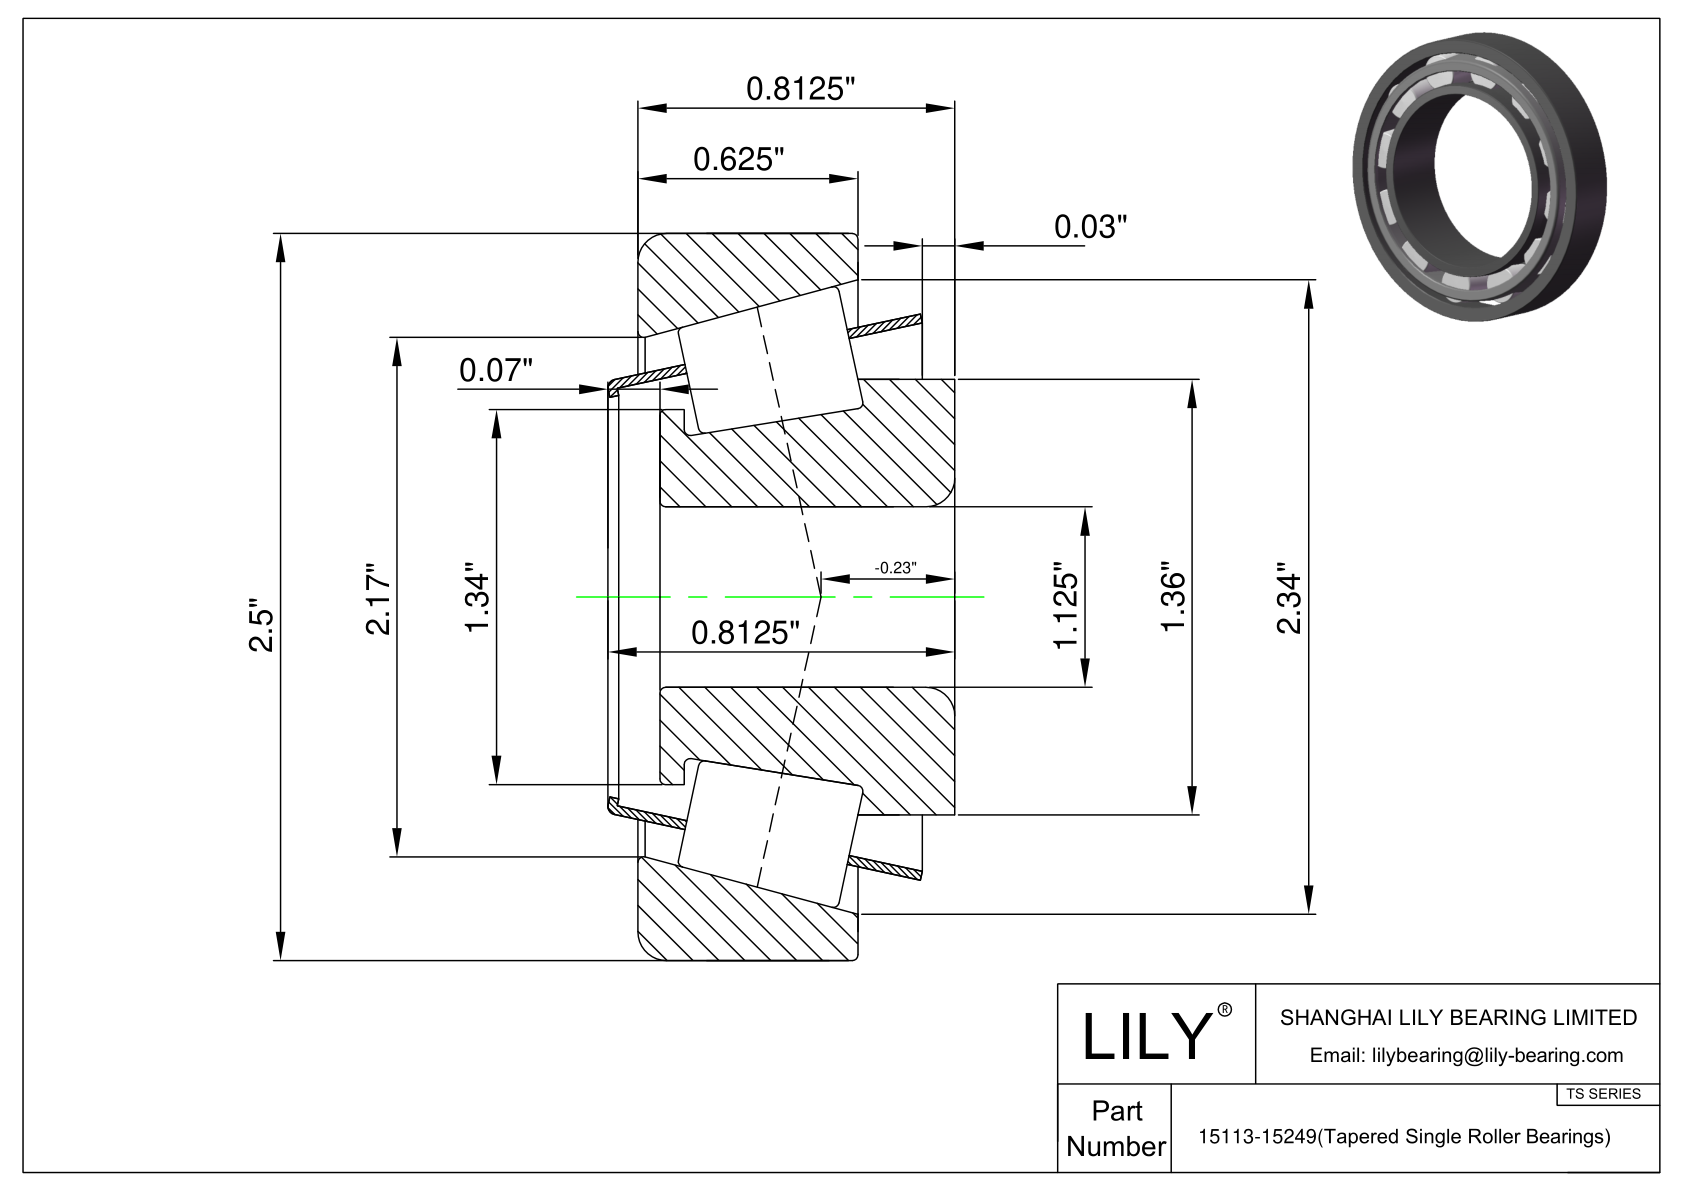 15113-15249 TS (Tapered Single Roller Bearings) (Imperial) cad drawing